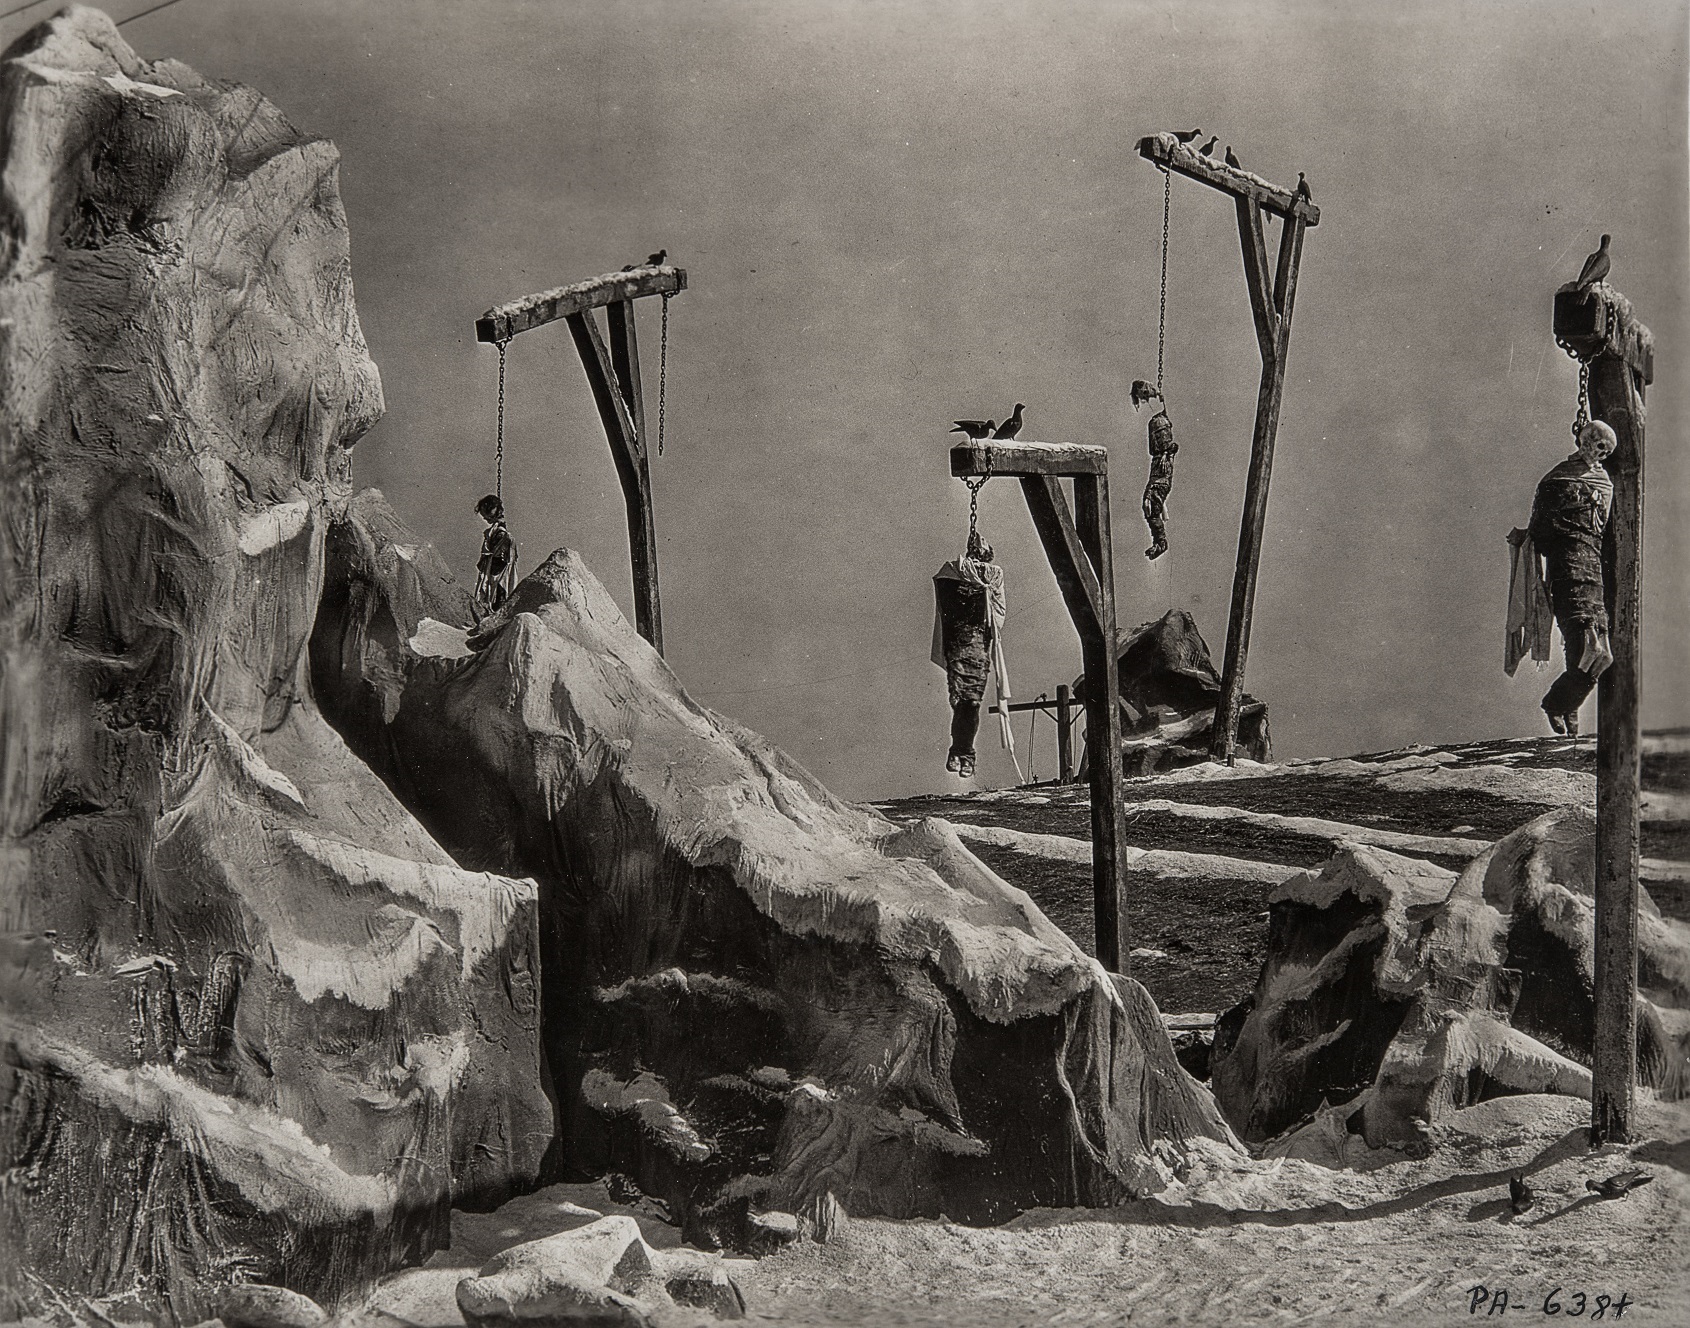 Landscape in The Man Who Laughs